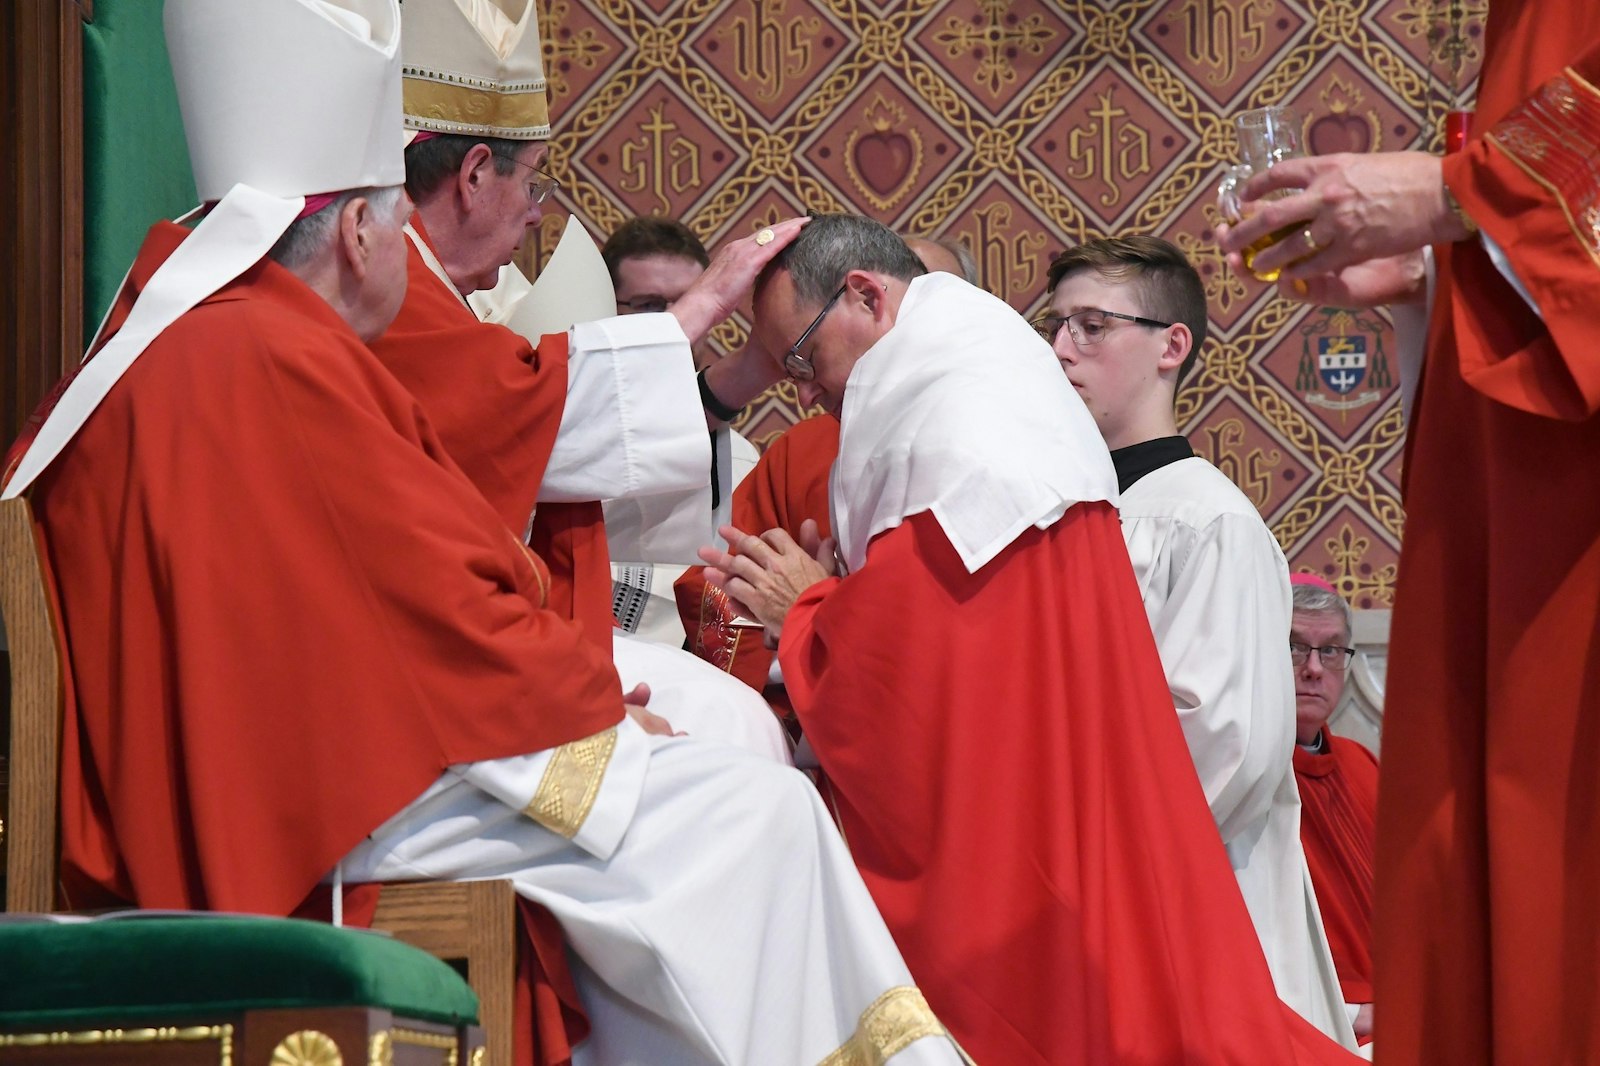 Detroit Archbishop Allen H. Vigneron lays his hands upon the head of Bishop Edward M. Lohse, ordaining him to the episcopate before a standing-room-only congregation July 25 at the Cathedral of St. Augustine in Kalamazoo. (John Grap | Diocese of Kalamazoo)